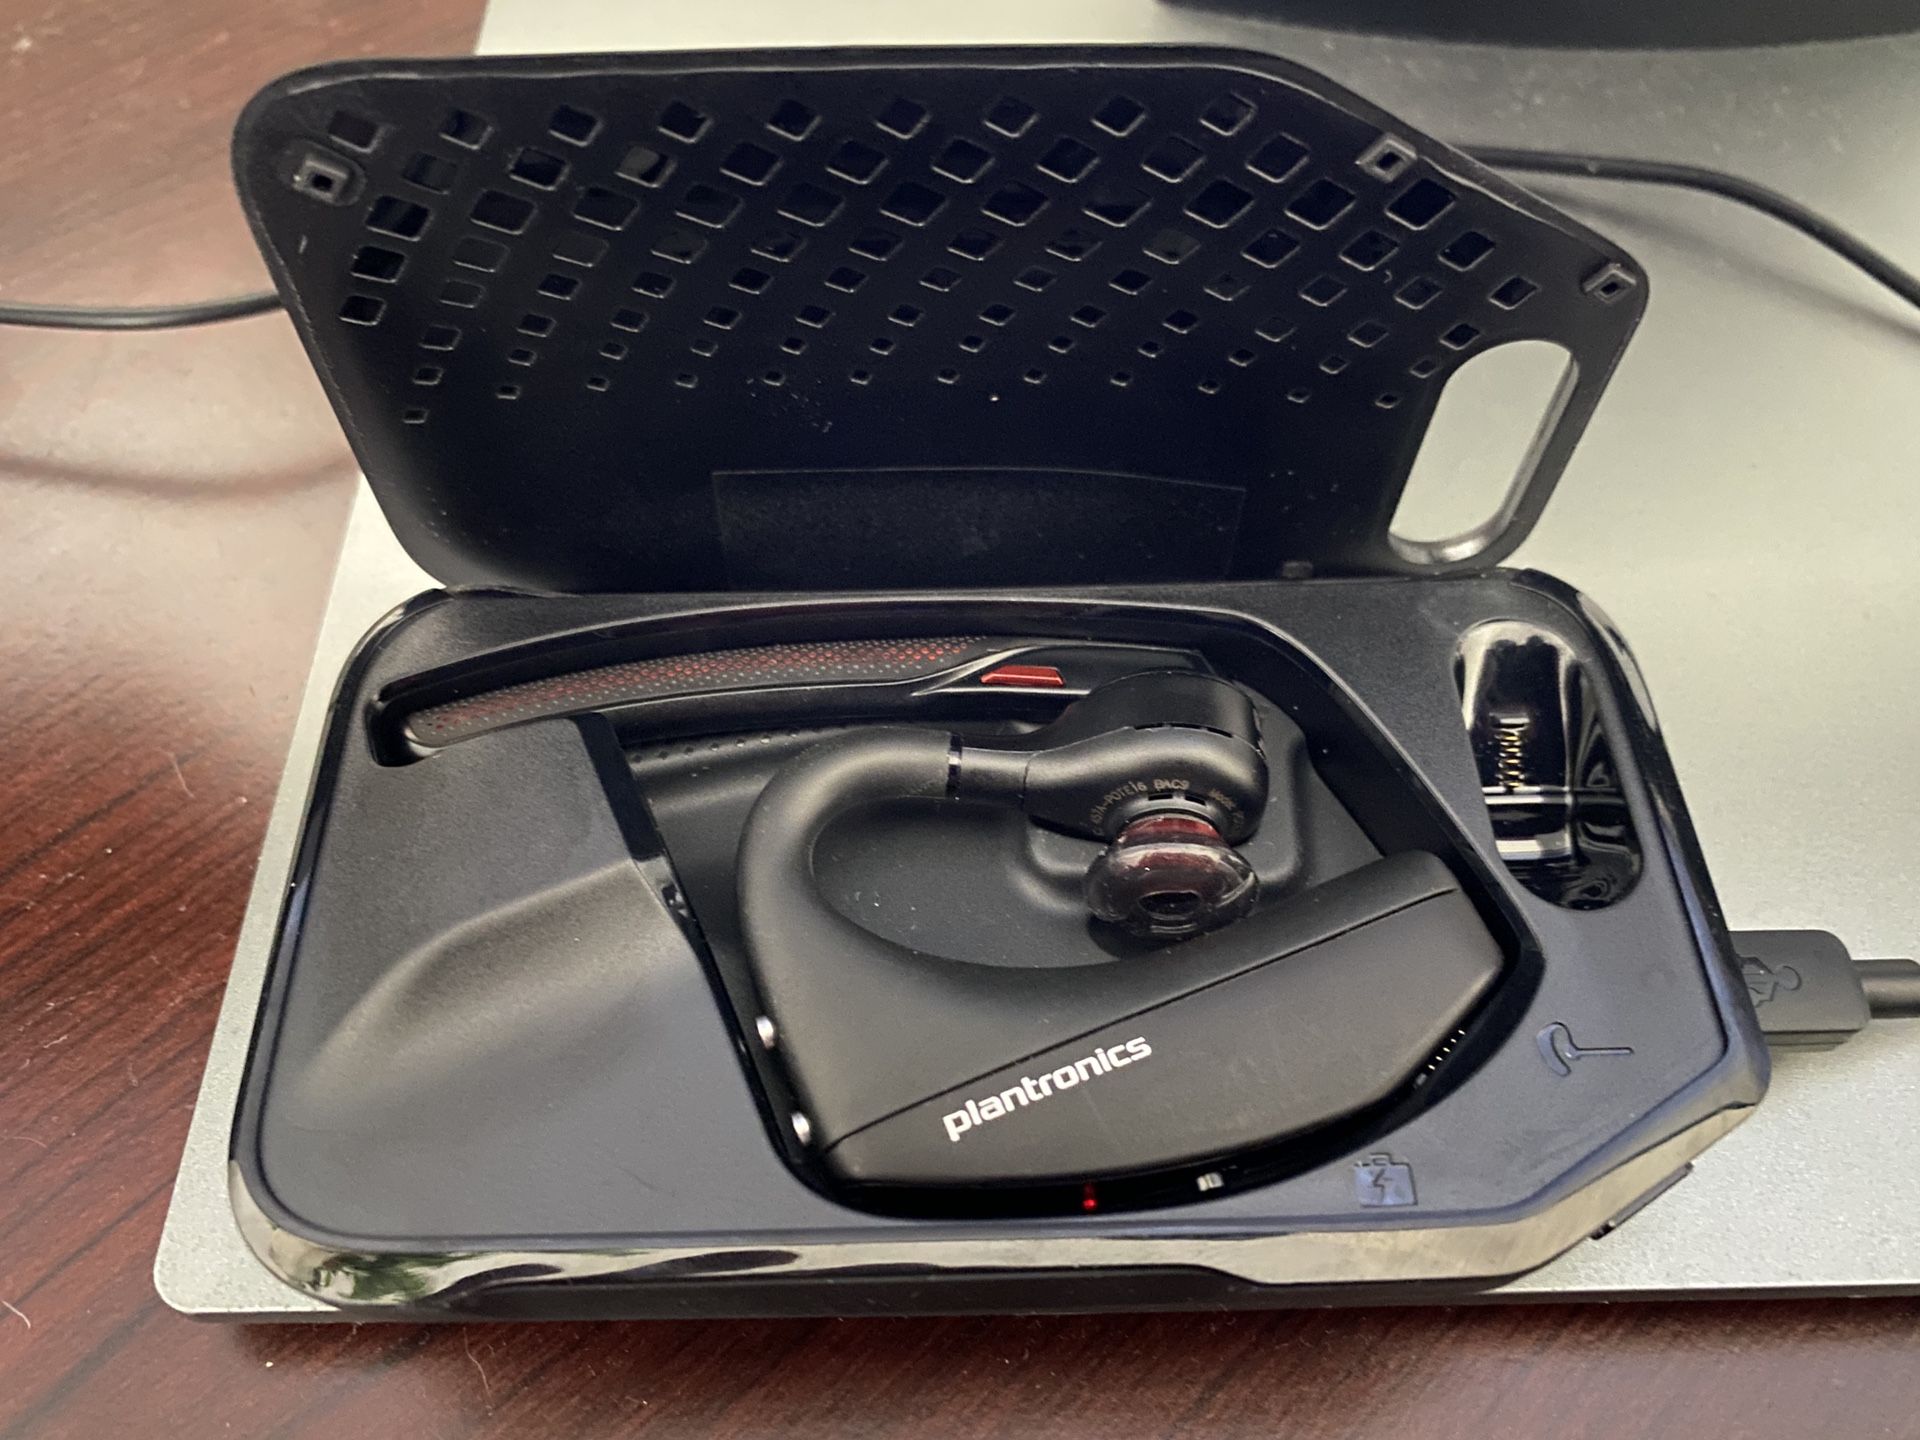 Plantronics Voyager 5200 Bluetooth Headset w/ Charging Case